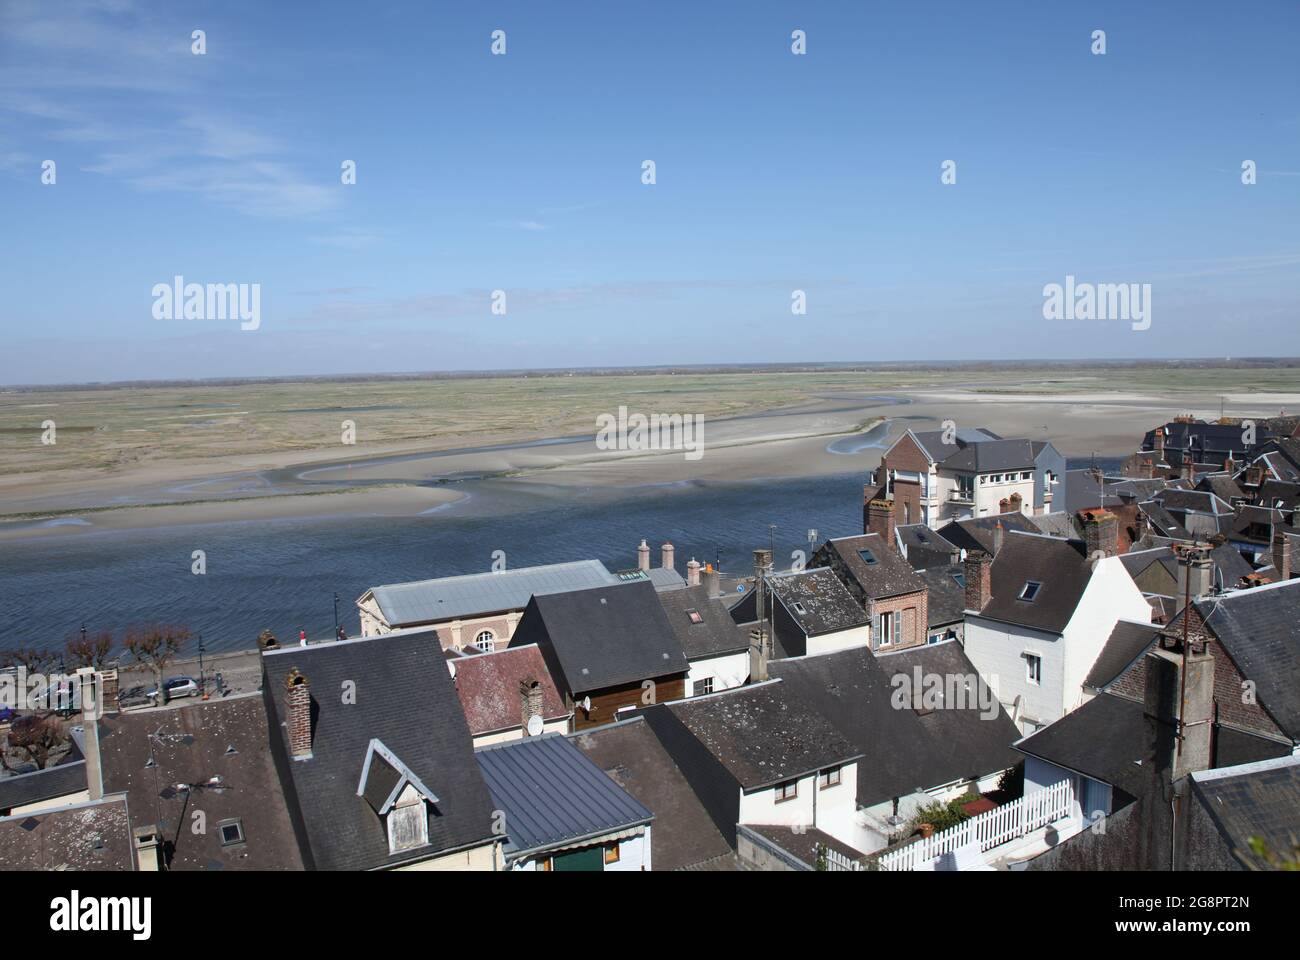 Overlooking the marshes, site of important migratory bird sanctuary, estuary of St Valery-sur-Somme from the village rooftops, Somme Bay, Picardy, France Stock Photo